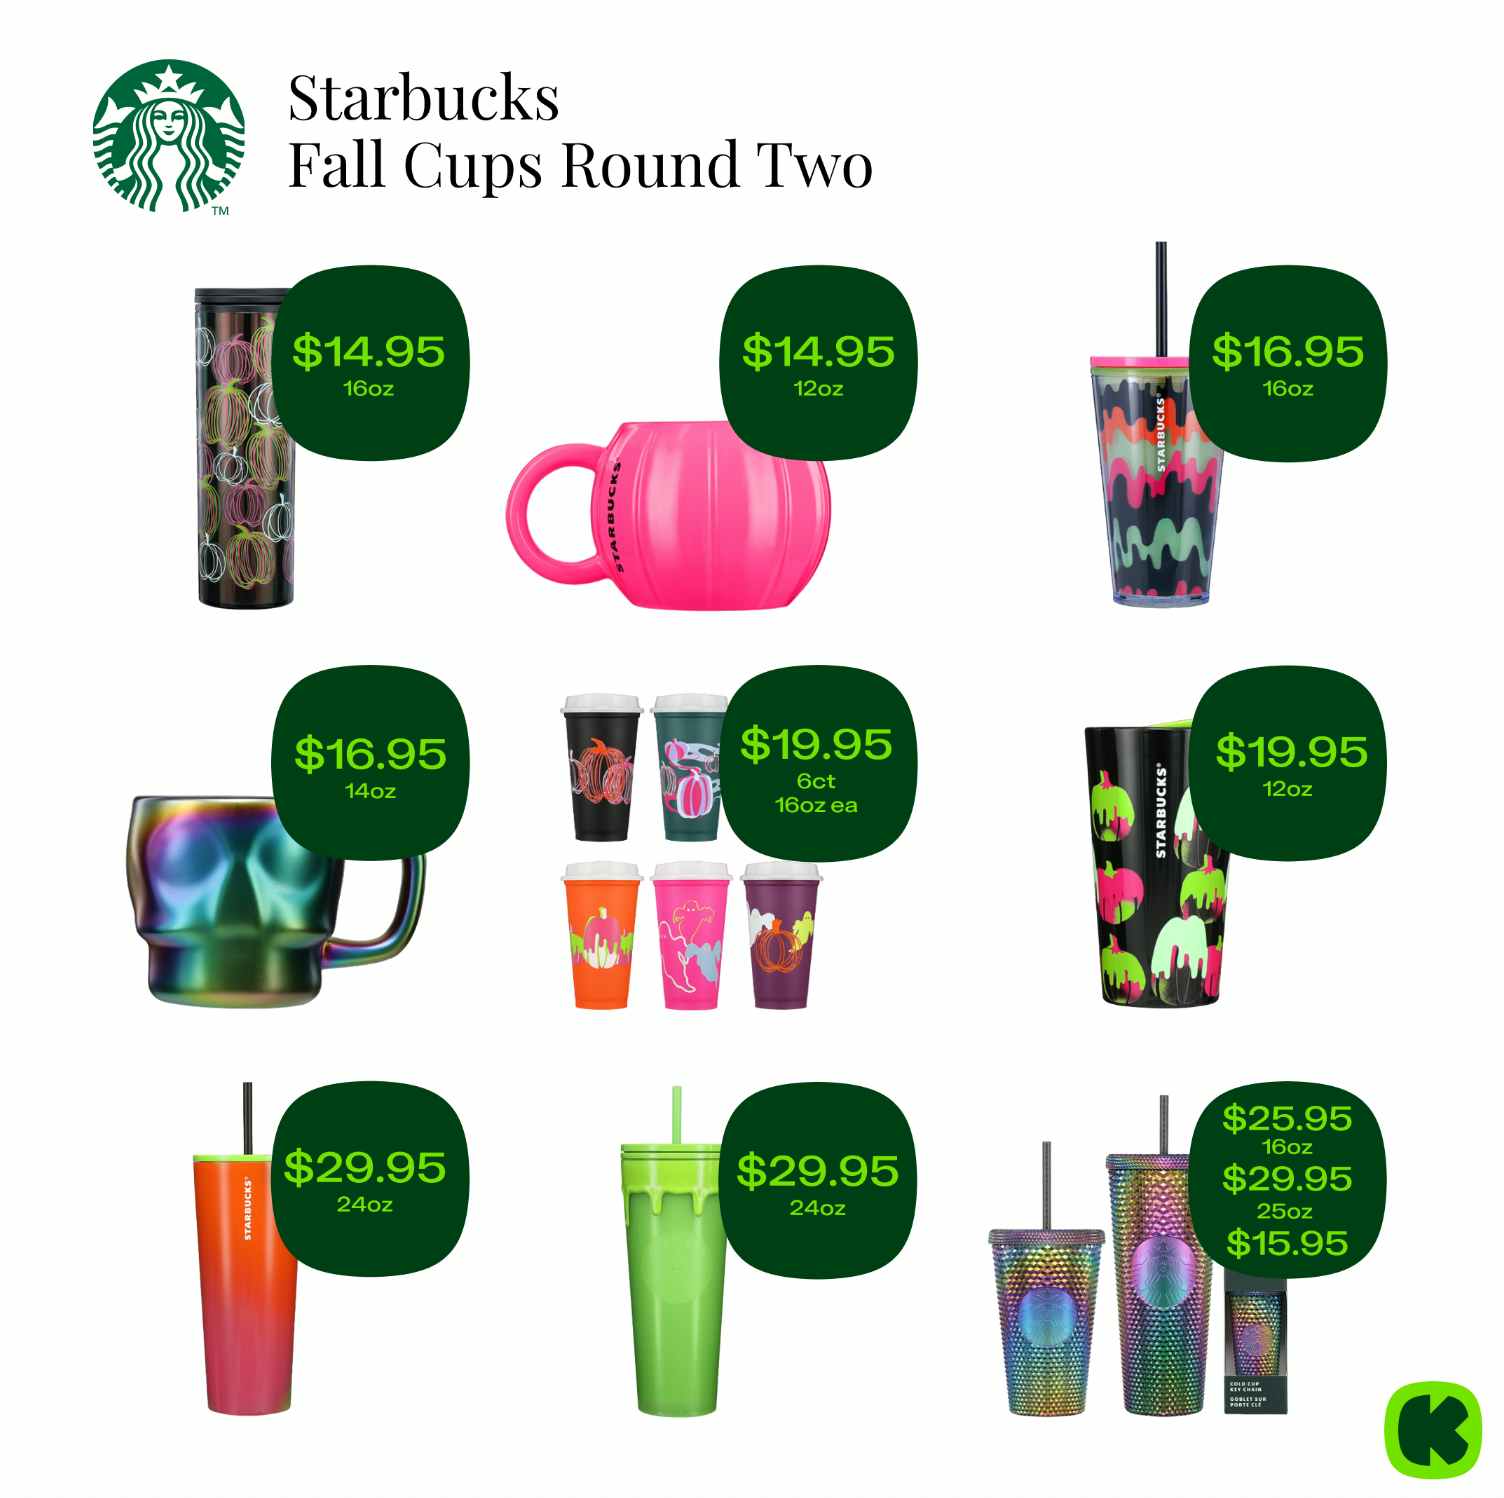 https://prod-cdn-thekrazycouponlady.imgix.net/wp-content/uploads/2022/09/starbucks-fall-cups-round-two-1694610707-1694610708.png?auto=format&fit=fill&q=25